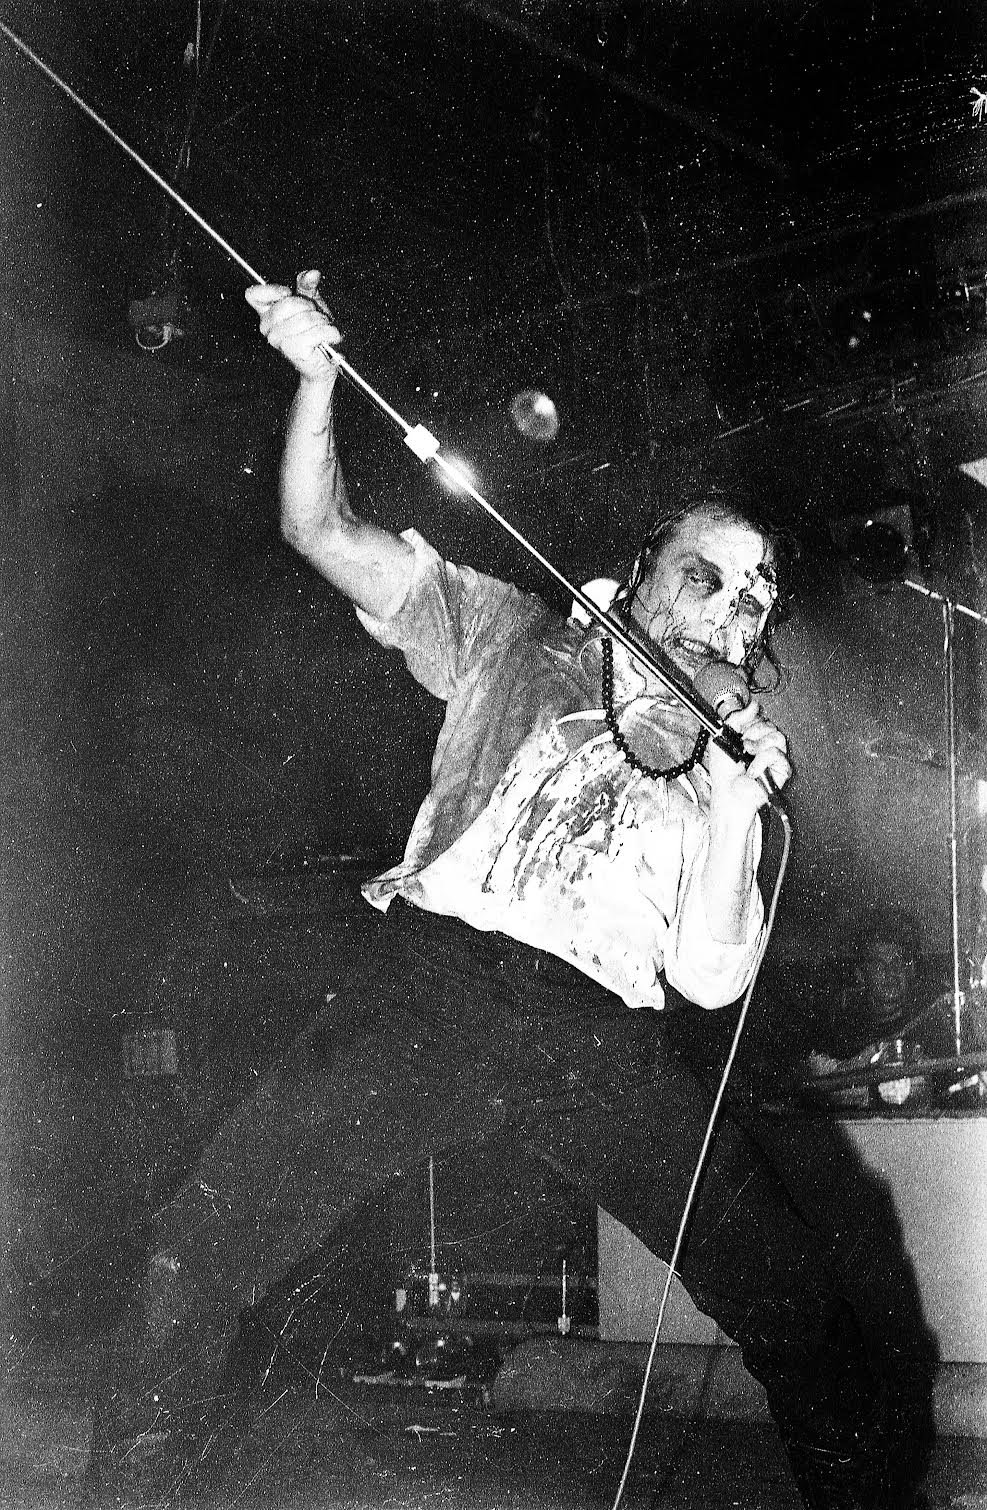  Dukey Flyswatter of Haunted Garage, 1990. Photograph by Edward Colver. 